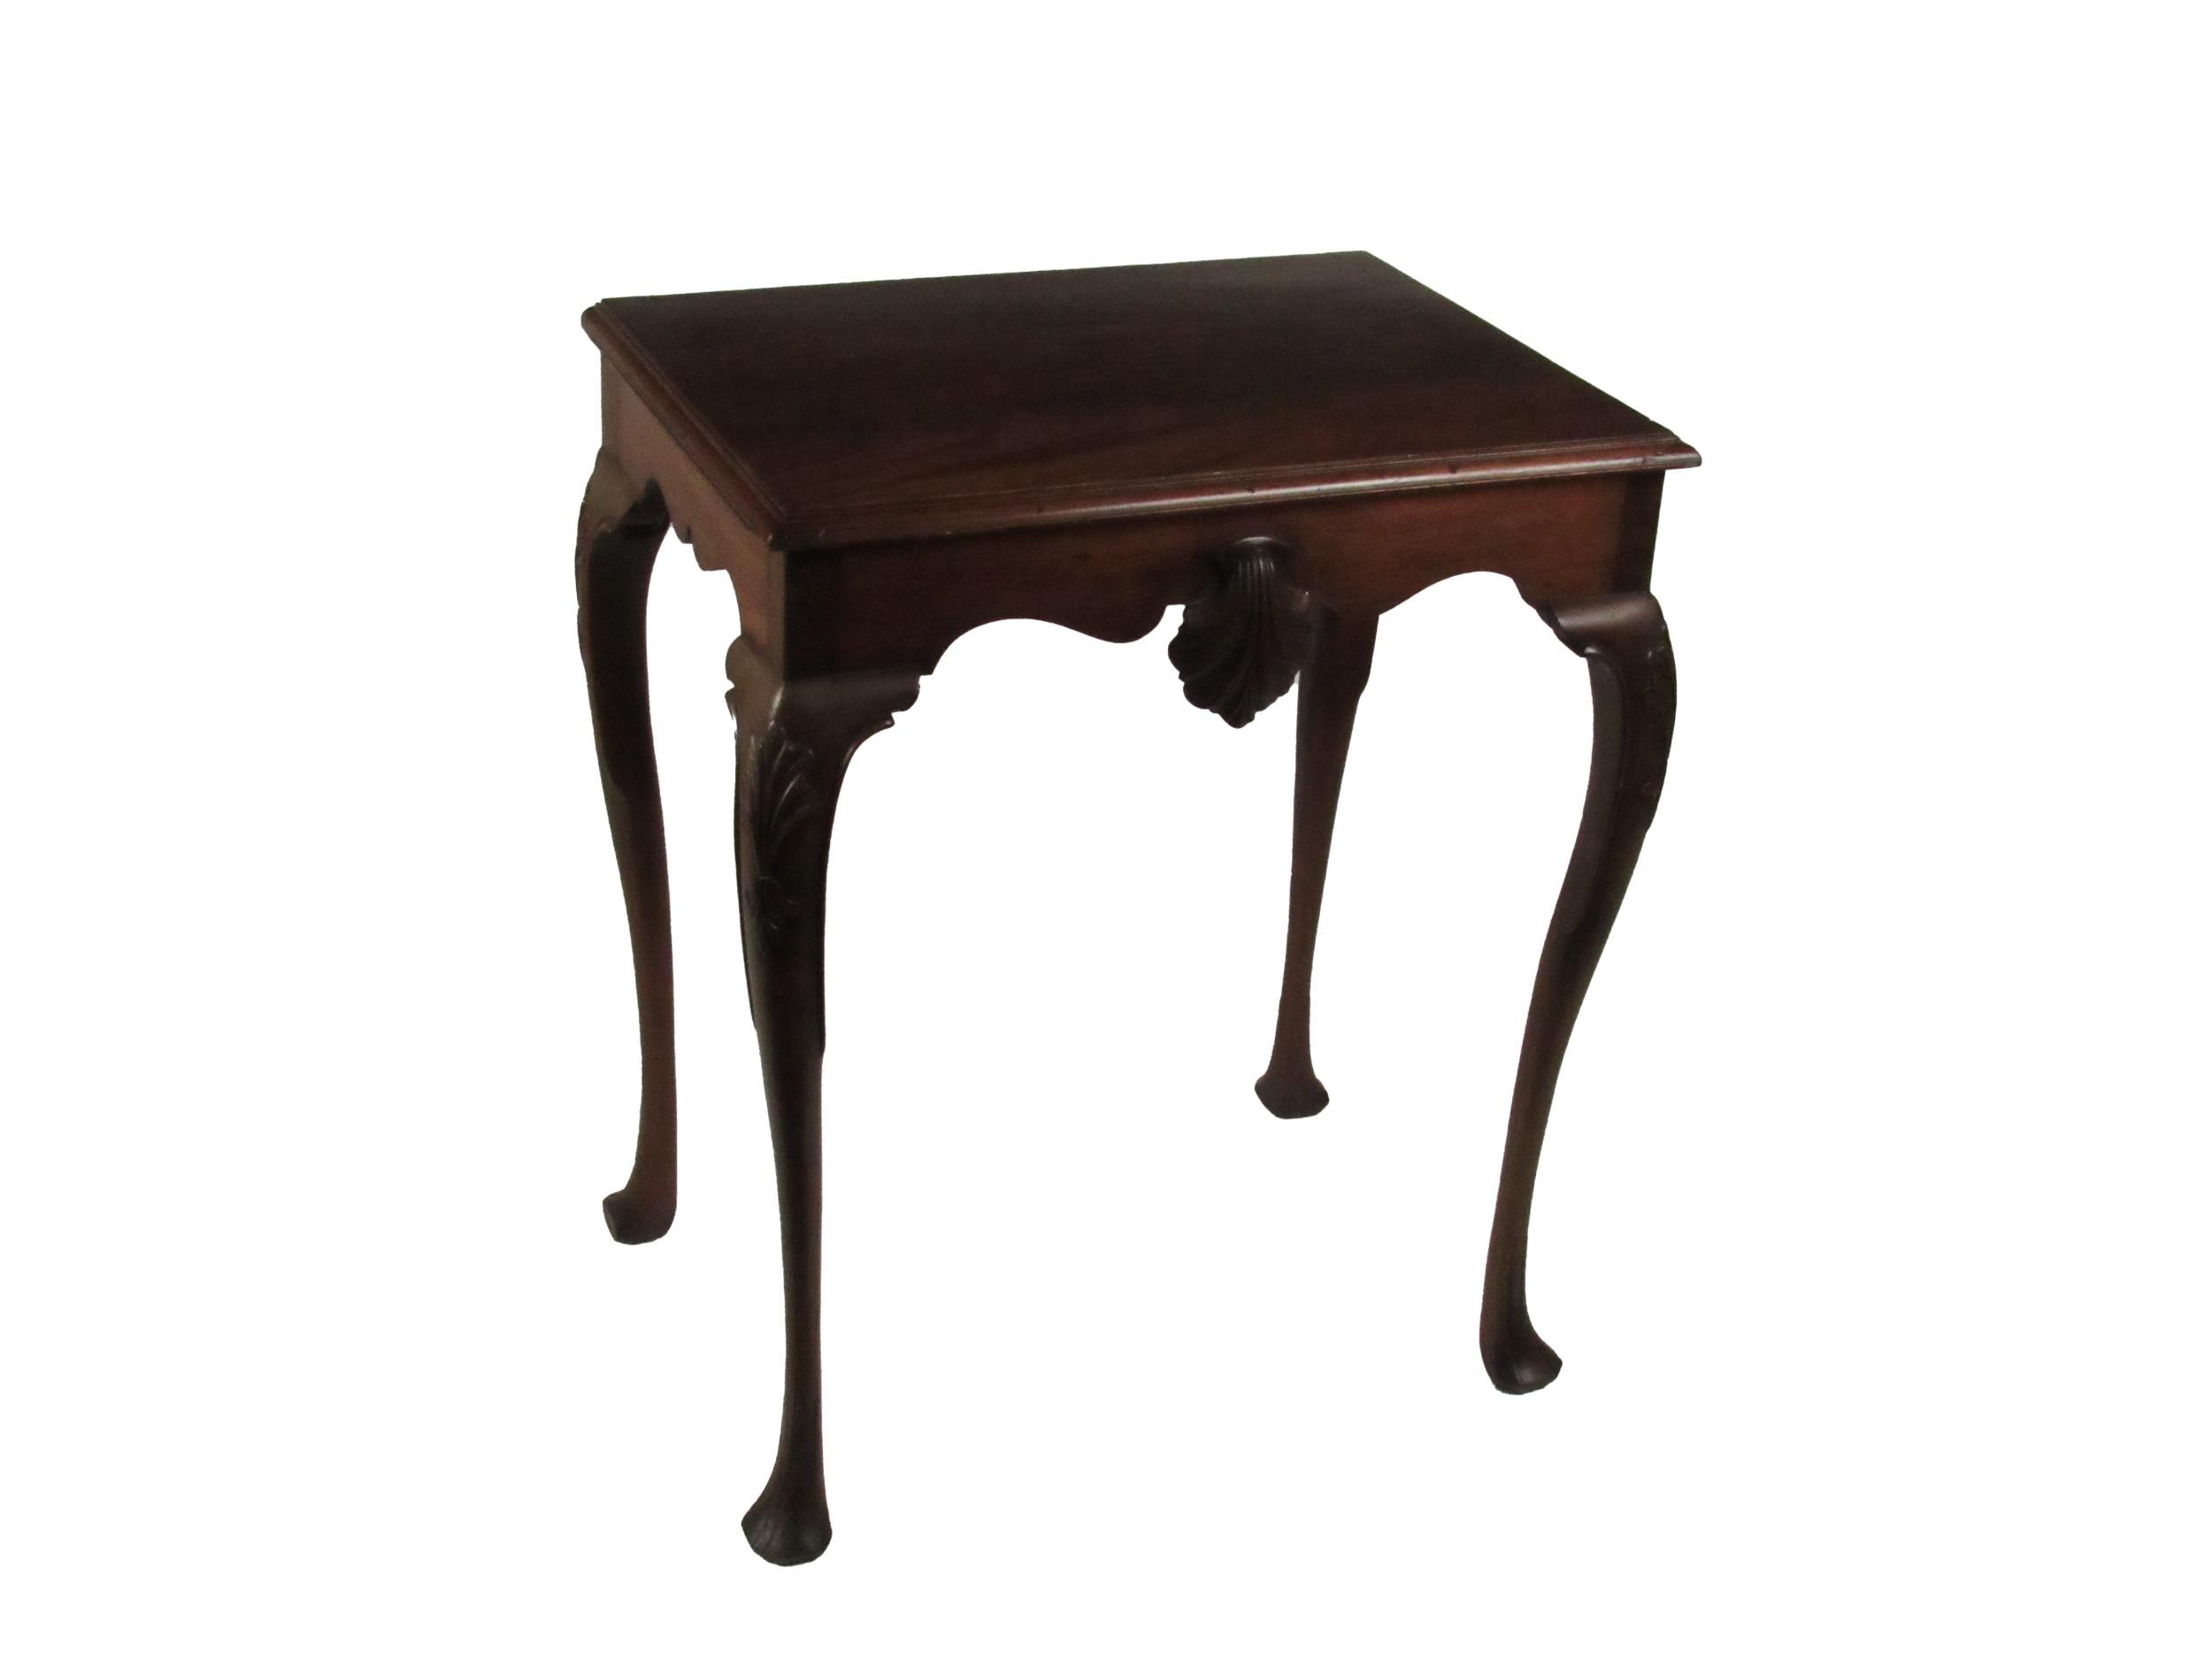 A fine quality attractive 19th Century Irish mahogany Side Table, of small proportions, the plain